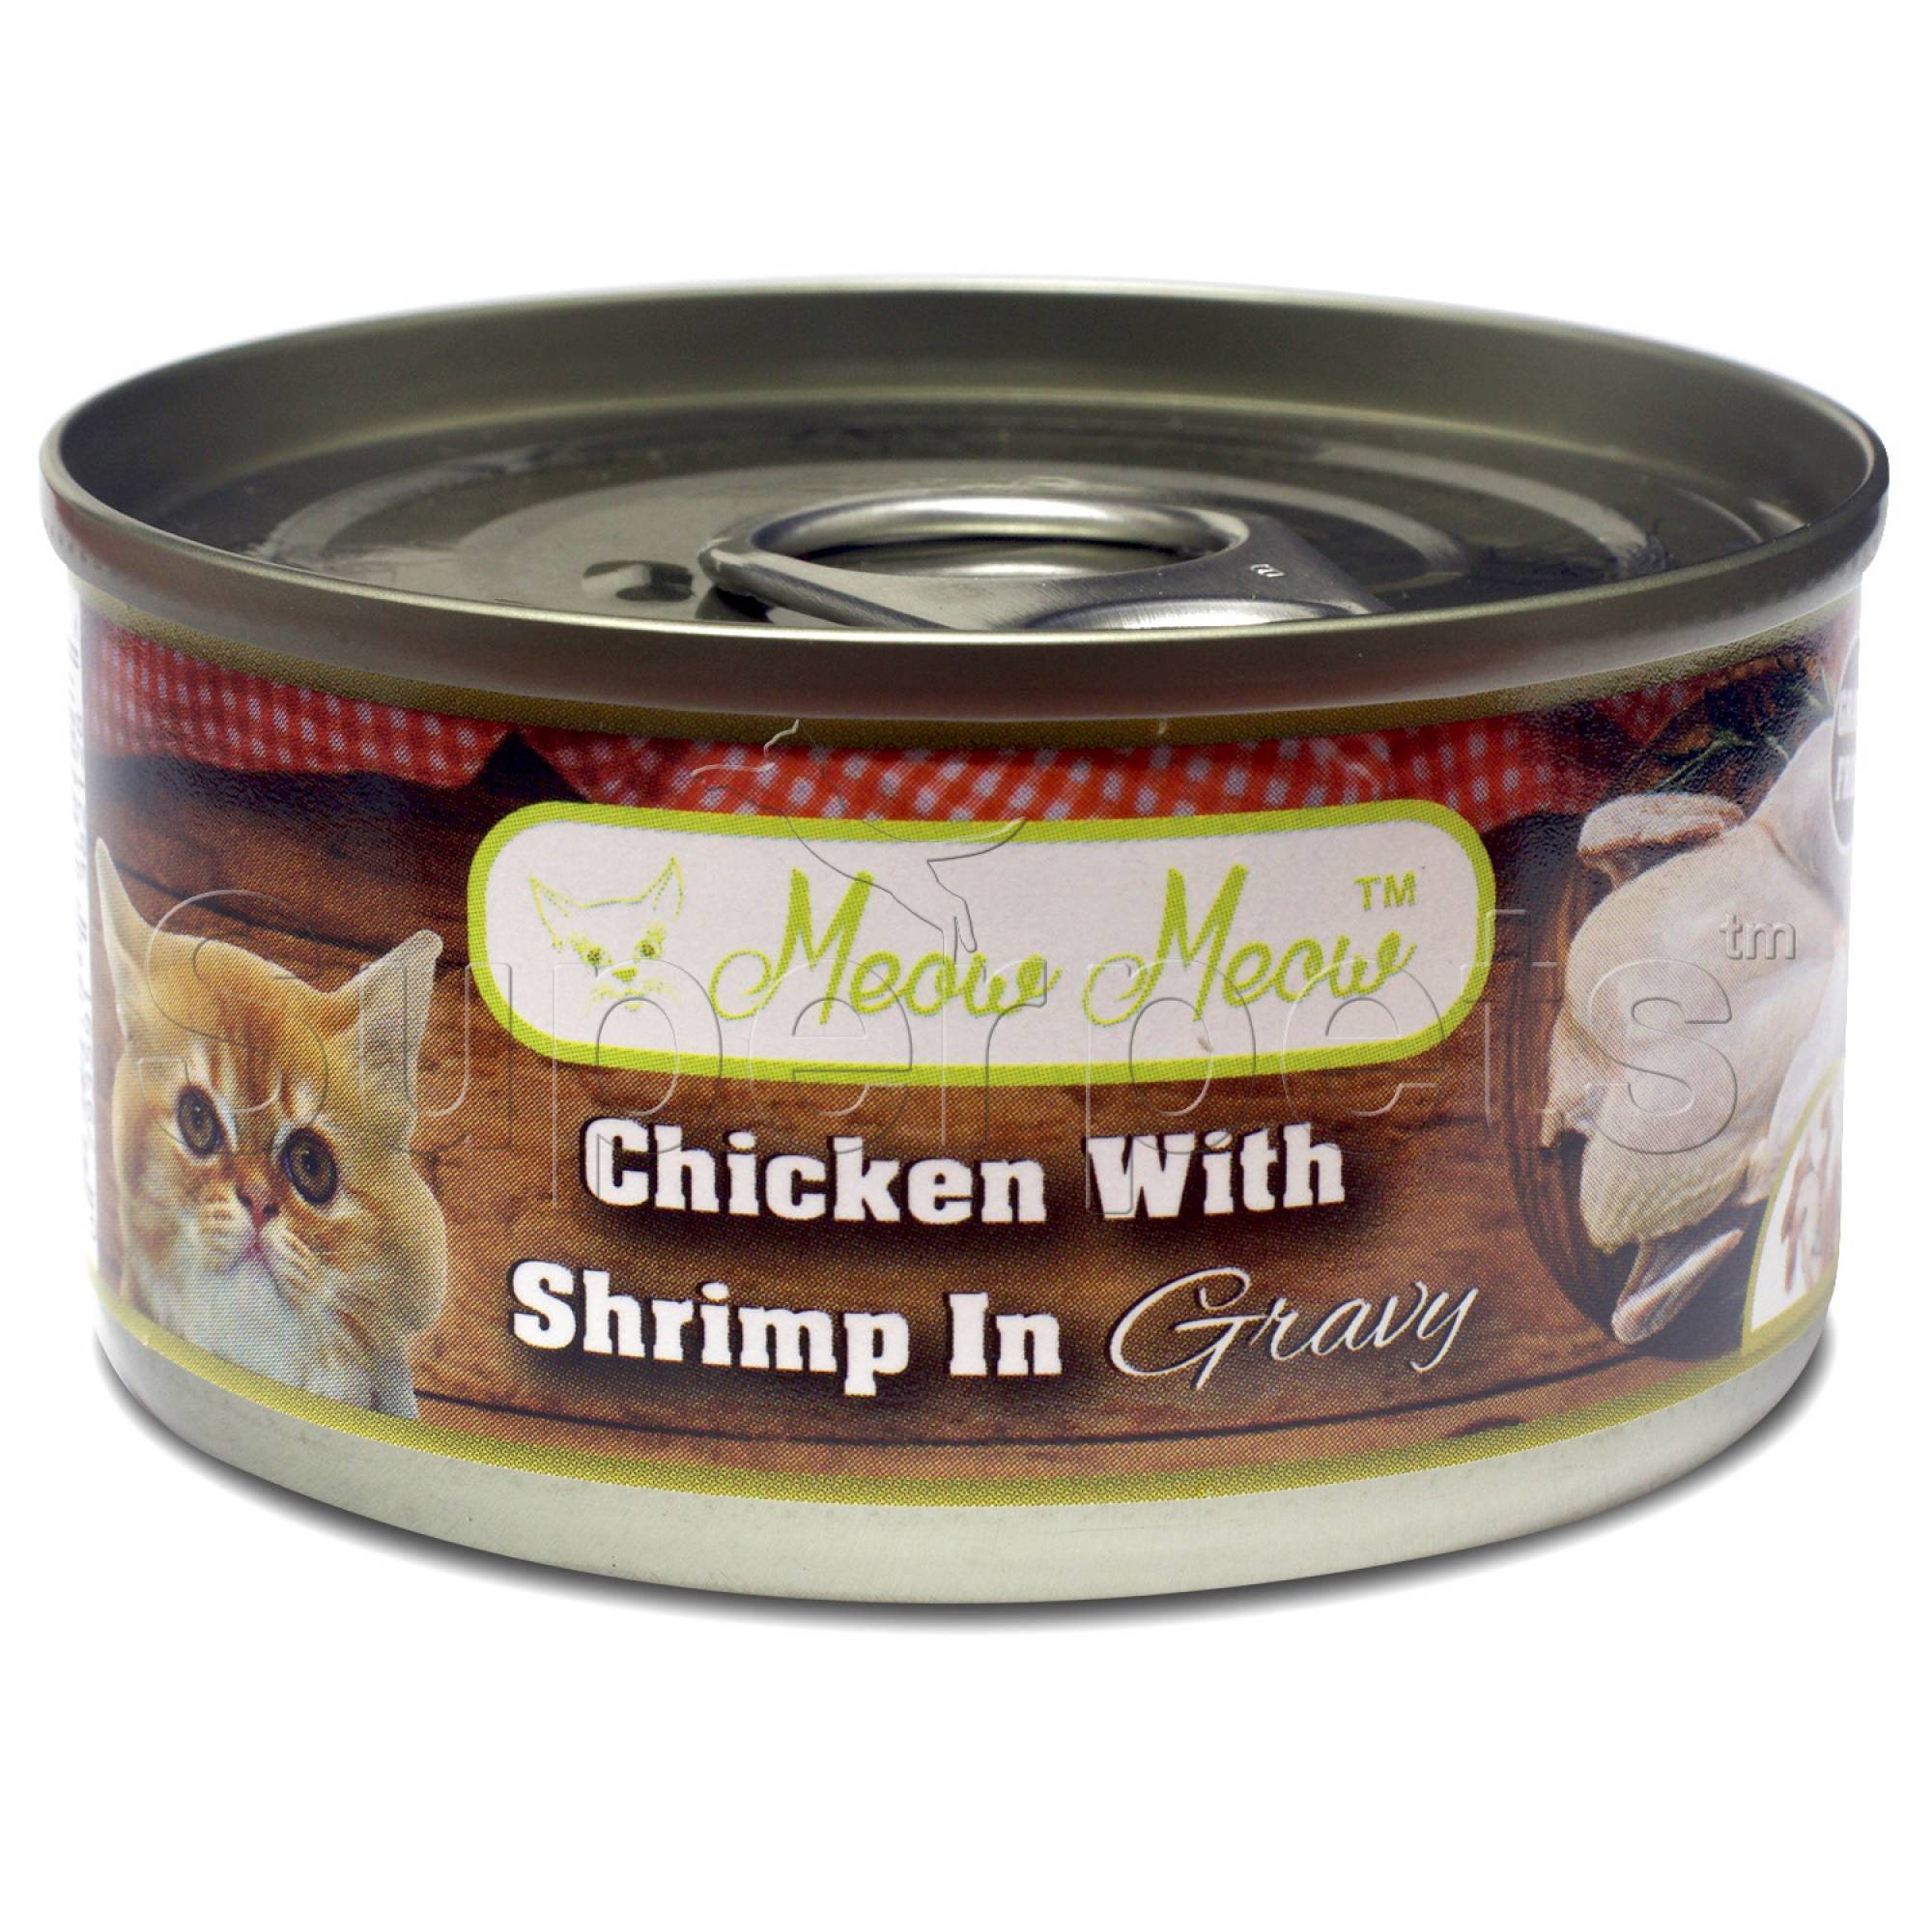 Meow Meow - Chicken with Shrimp in Gravy - Grain Free 80g